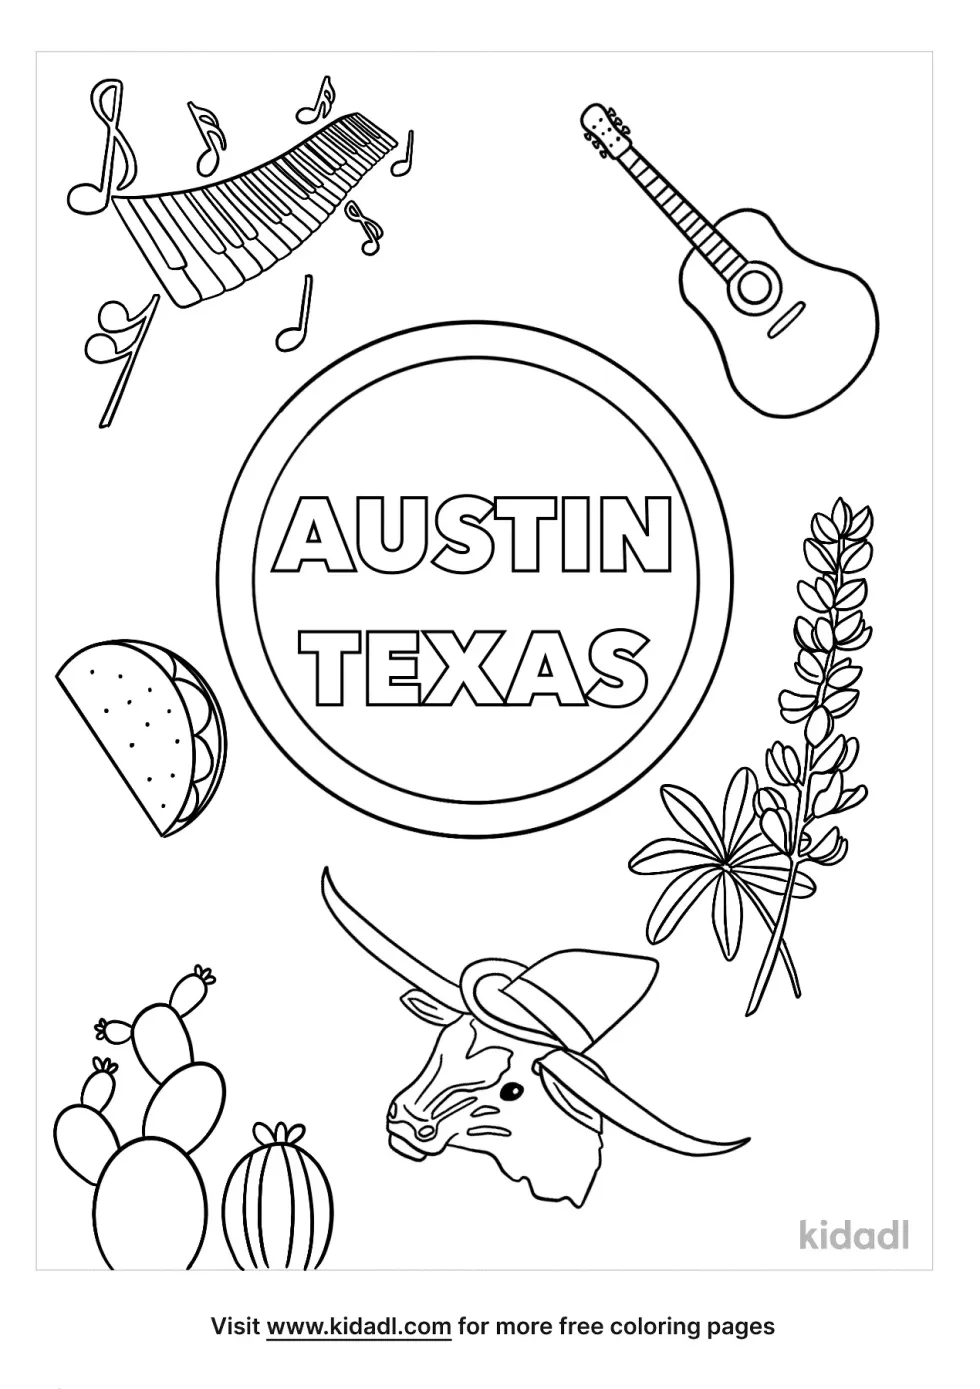 Austin Texas Coloring Page